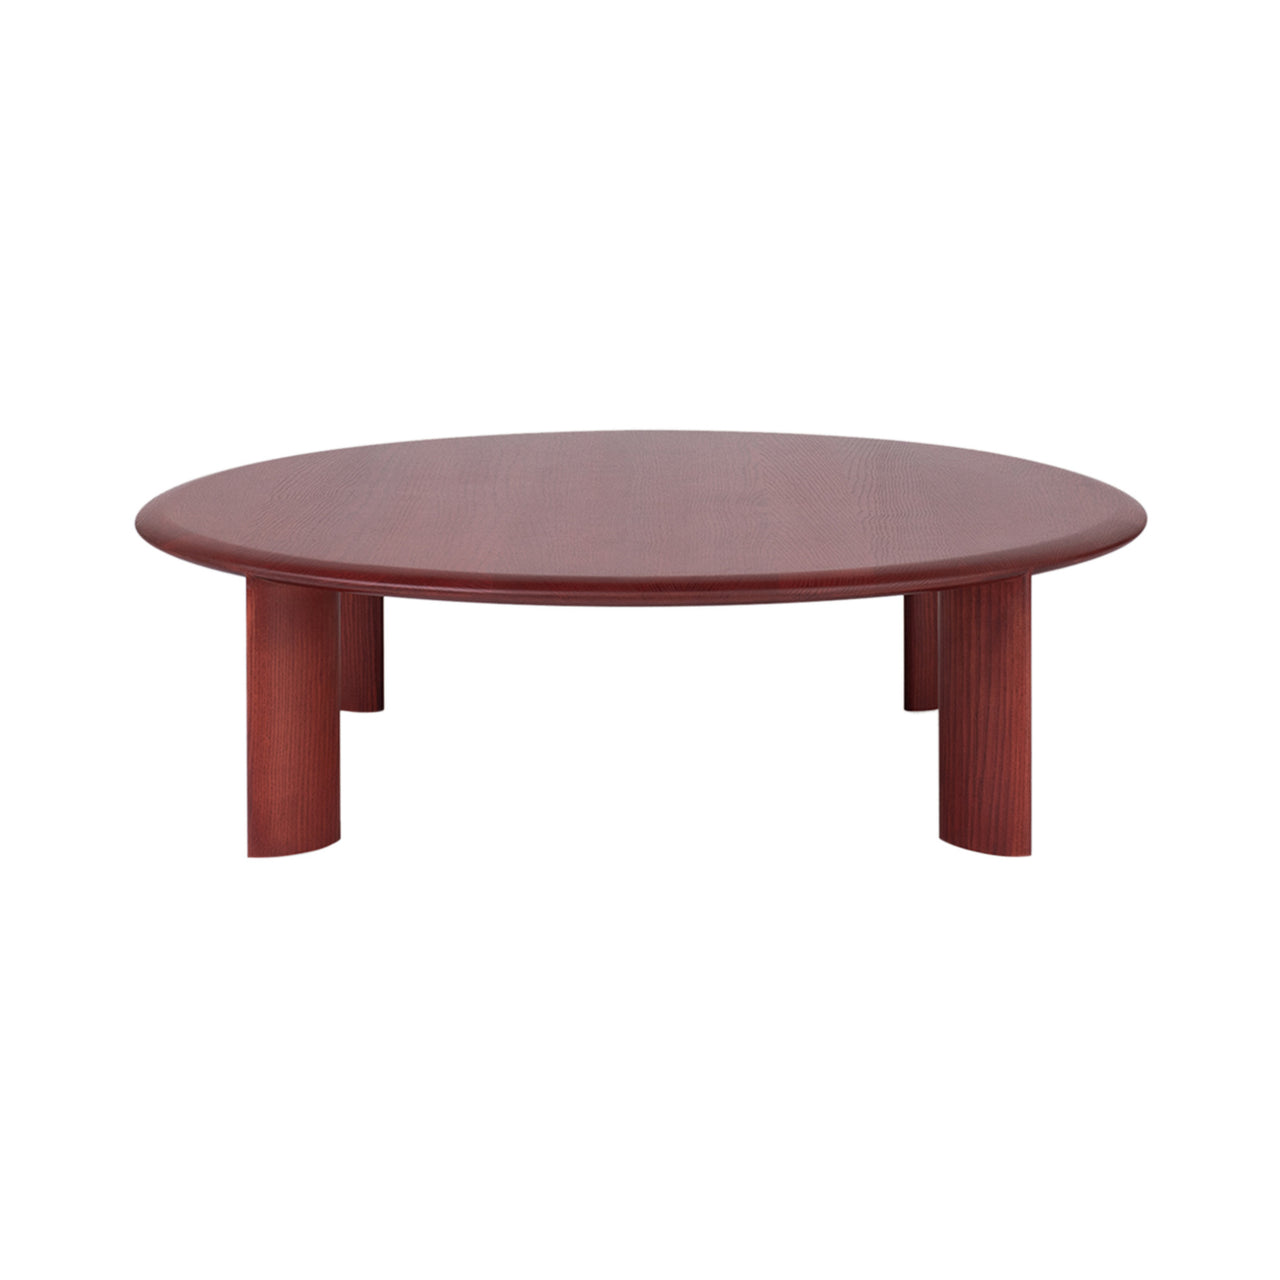 IO Coffee Table: Large + Vintage Red